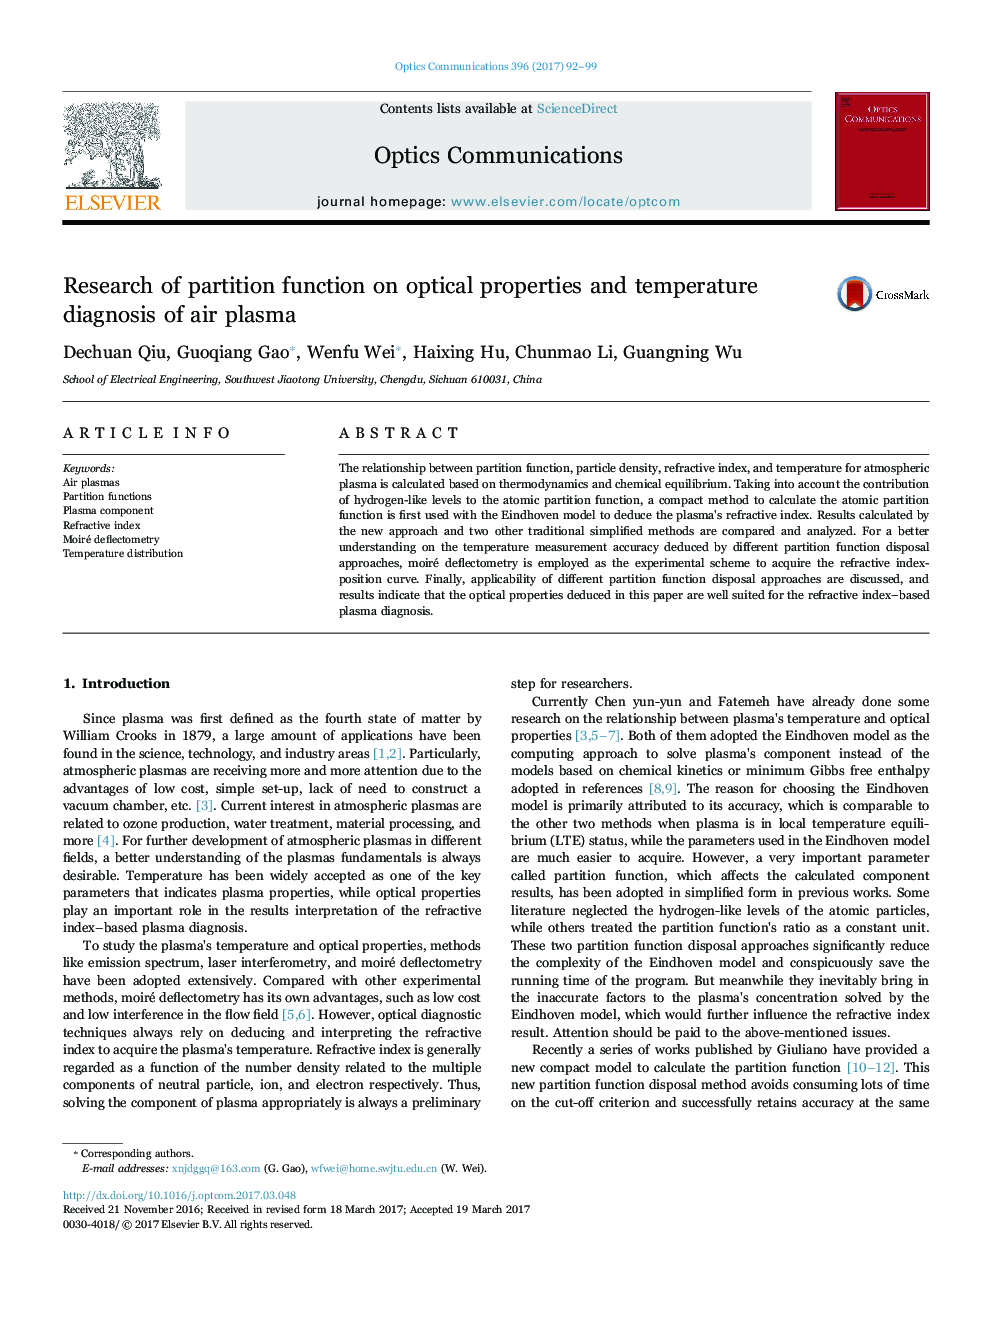 Research of partition function on optical properties and temperature diagnosis of air plasma